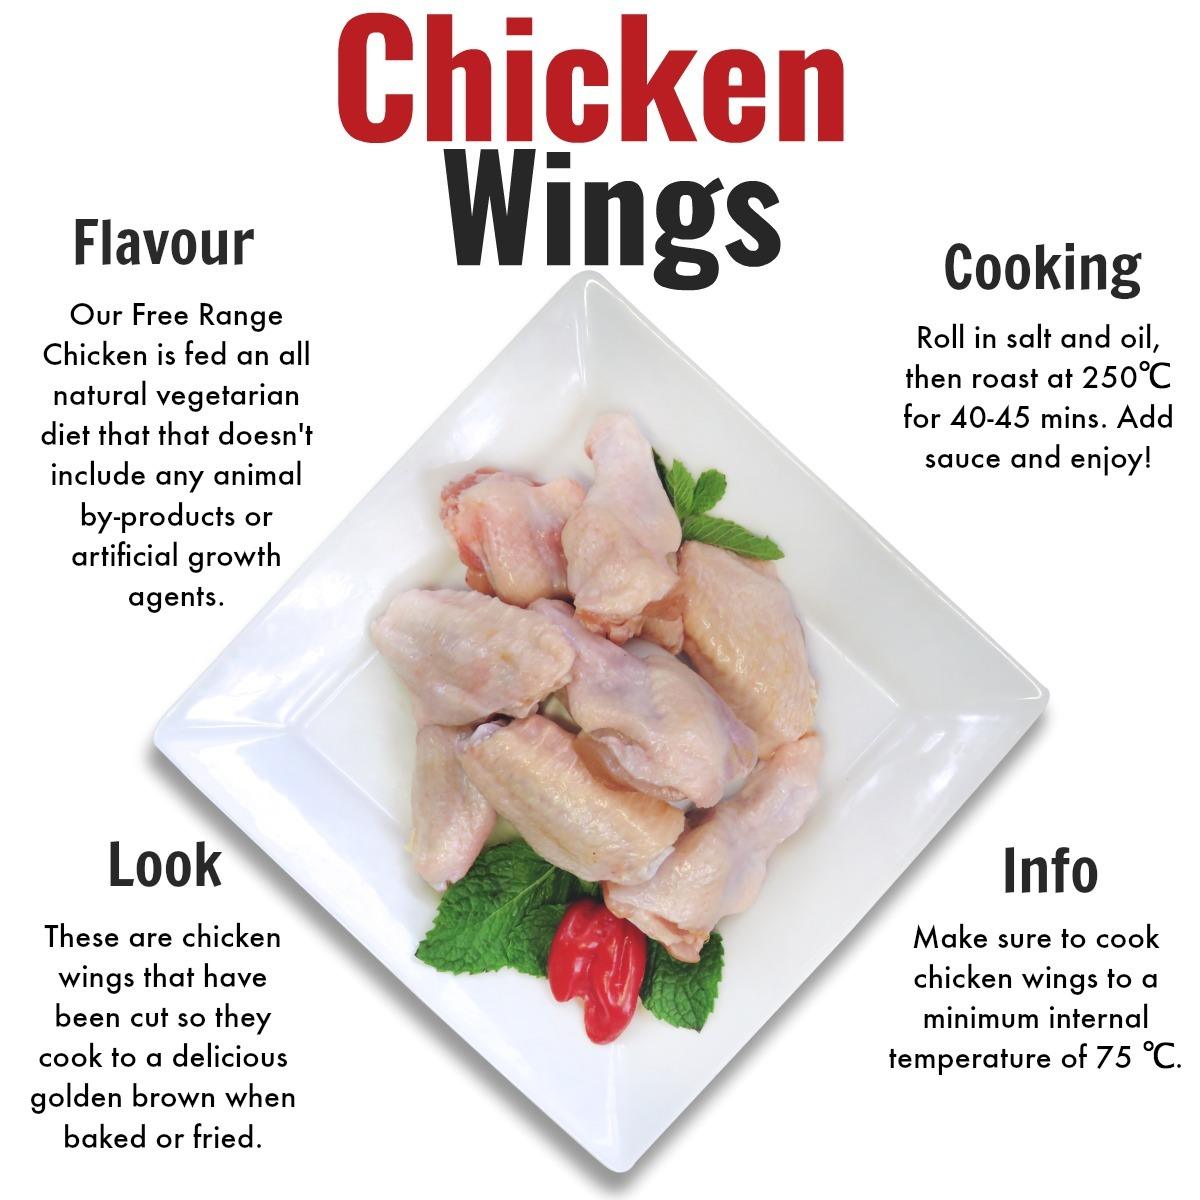 Affordable Chicken delivery near me breast thigh drumstick wings whole chicken - Nutrafarms - Chicken Wings